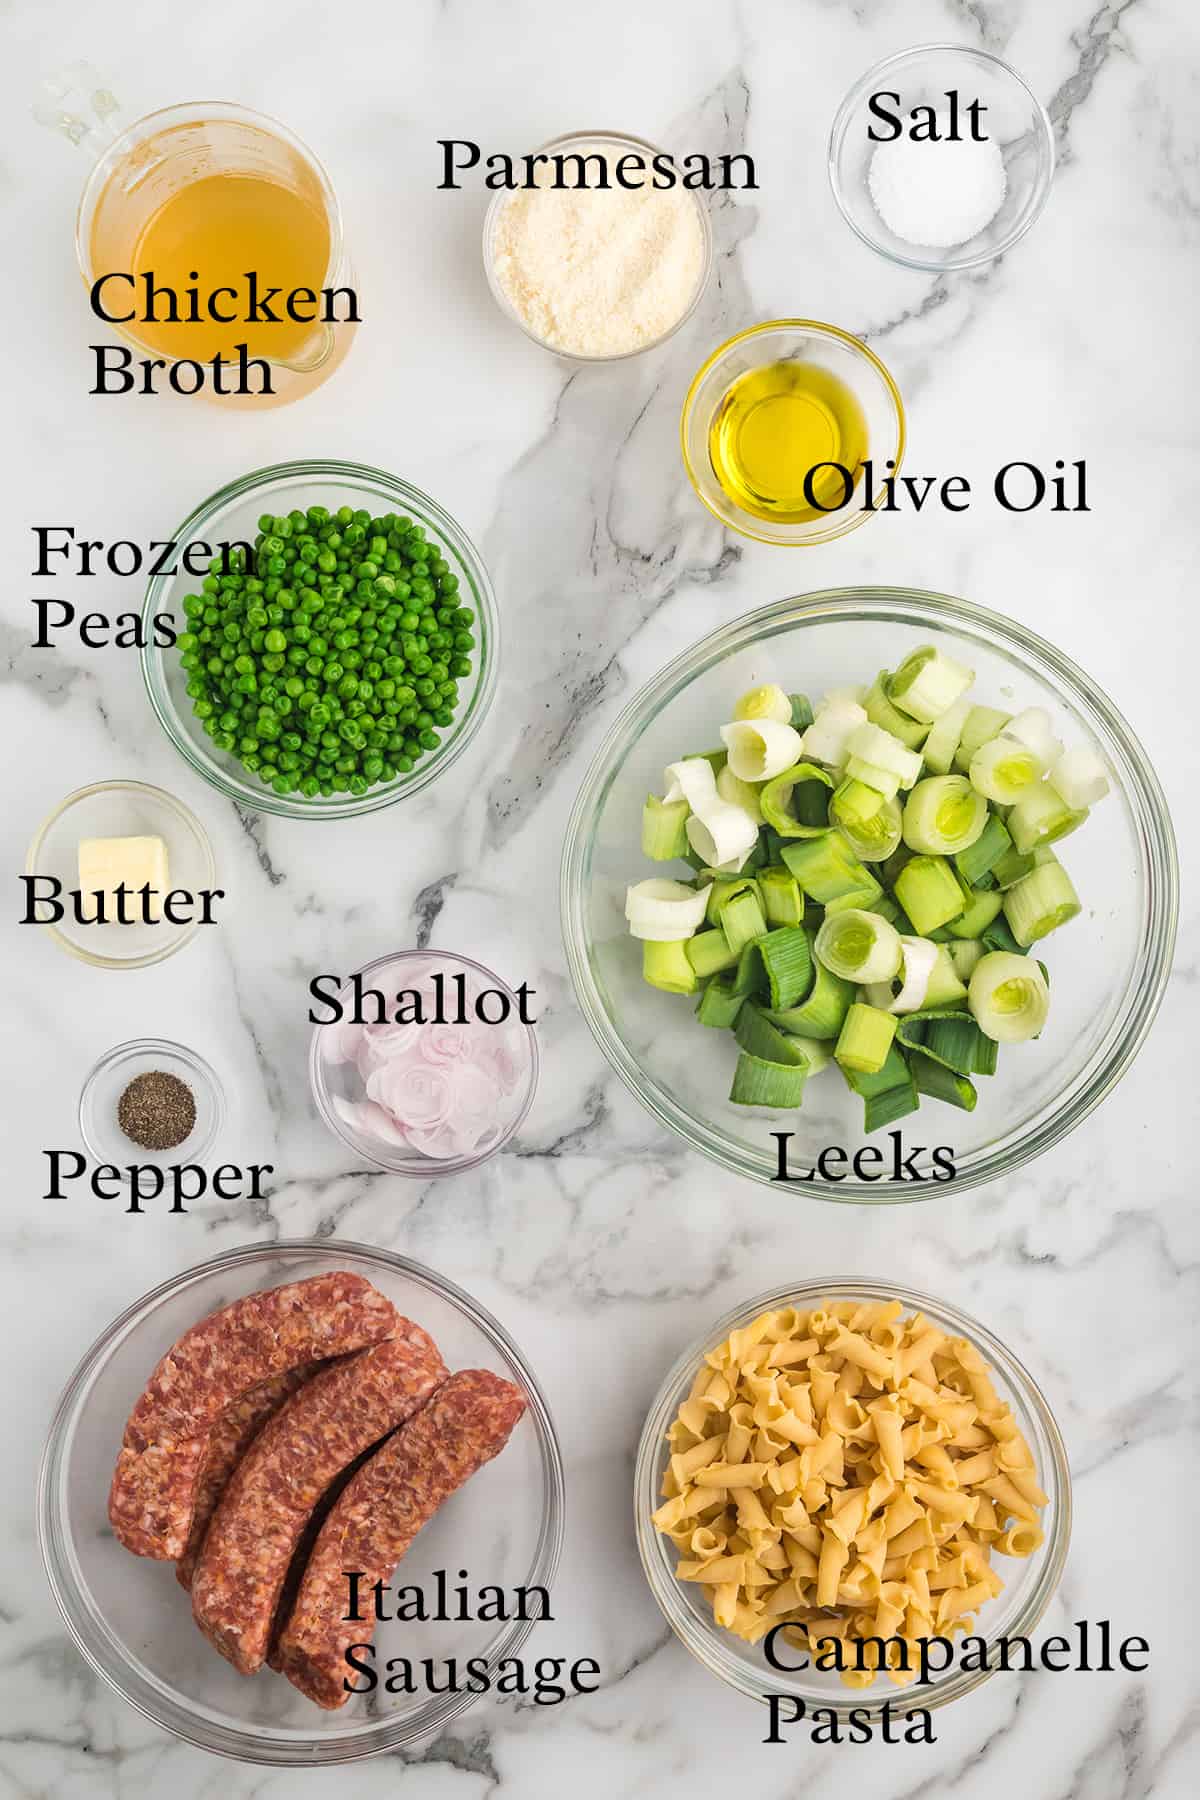 A labeled photo of all the ingredients needed for the recipe.